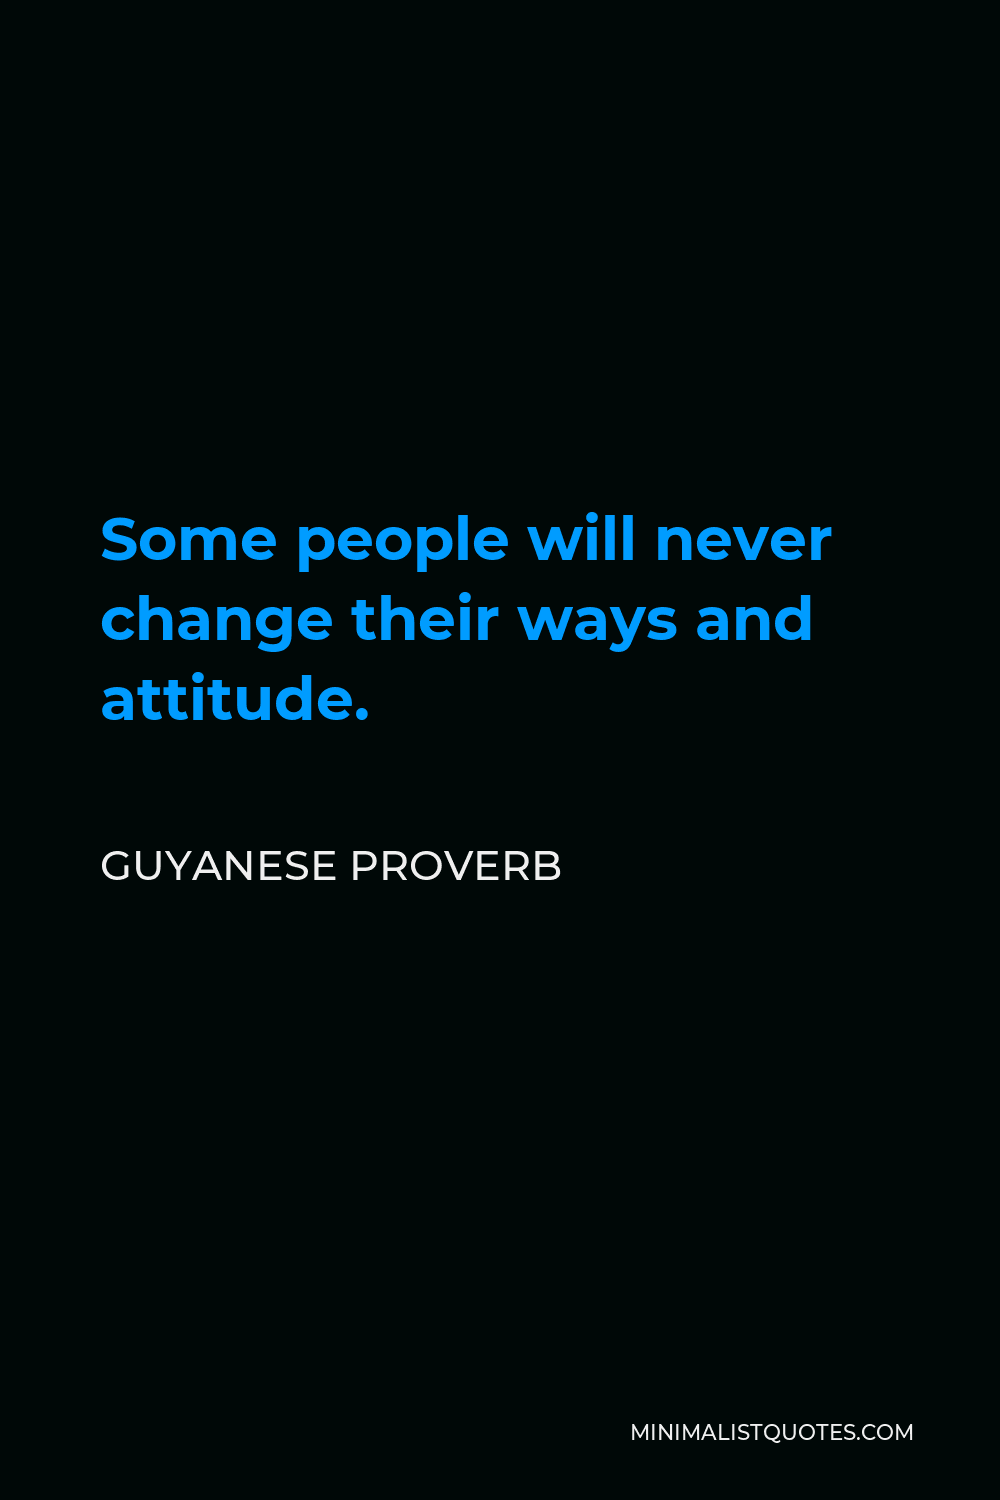 Guyanese Proverb Quote - Some people will never change their ways and attitude.